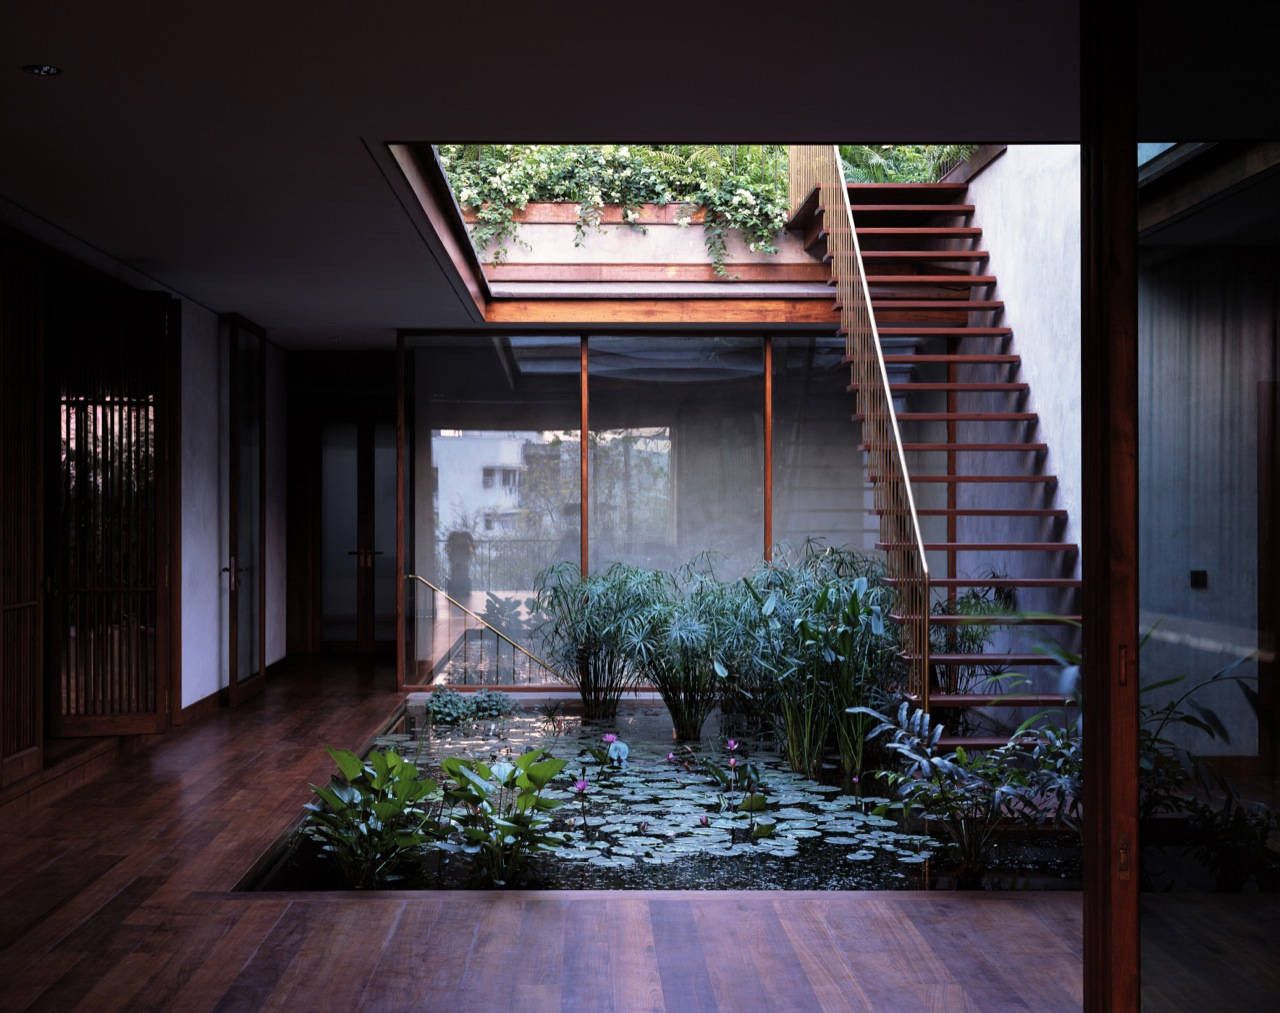 House on Pali Hill interior courtyard